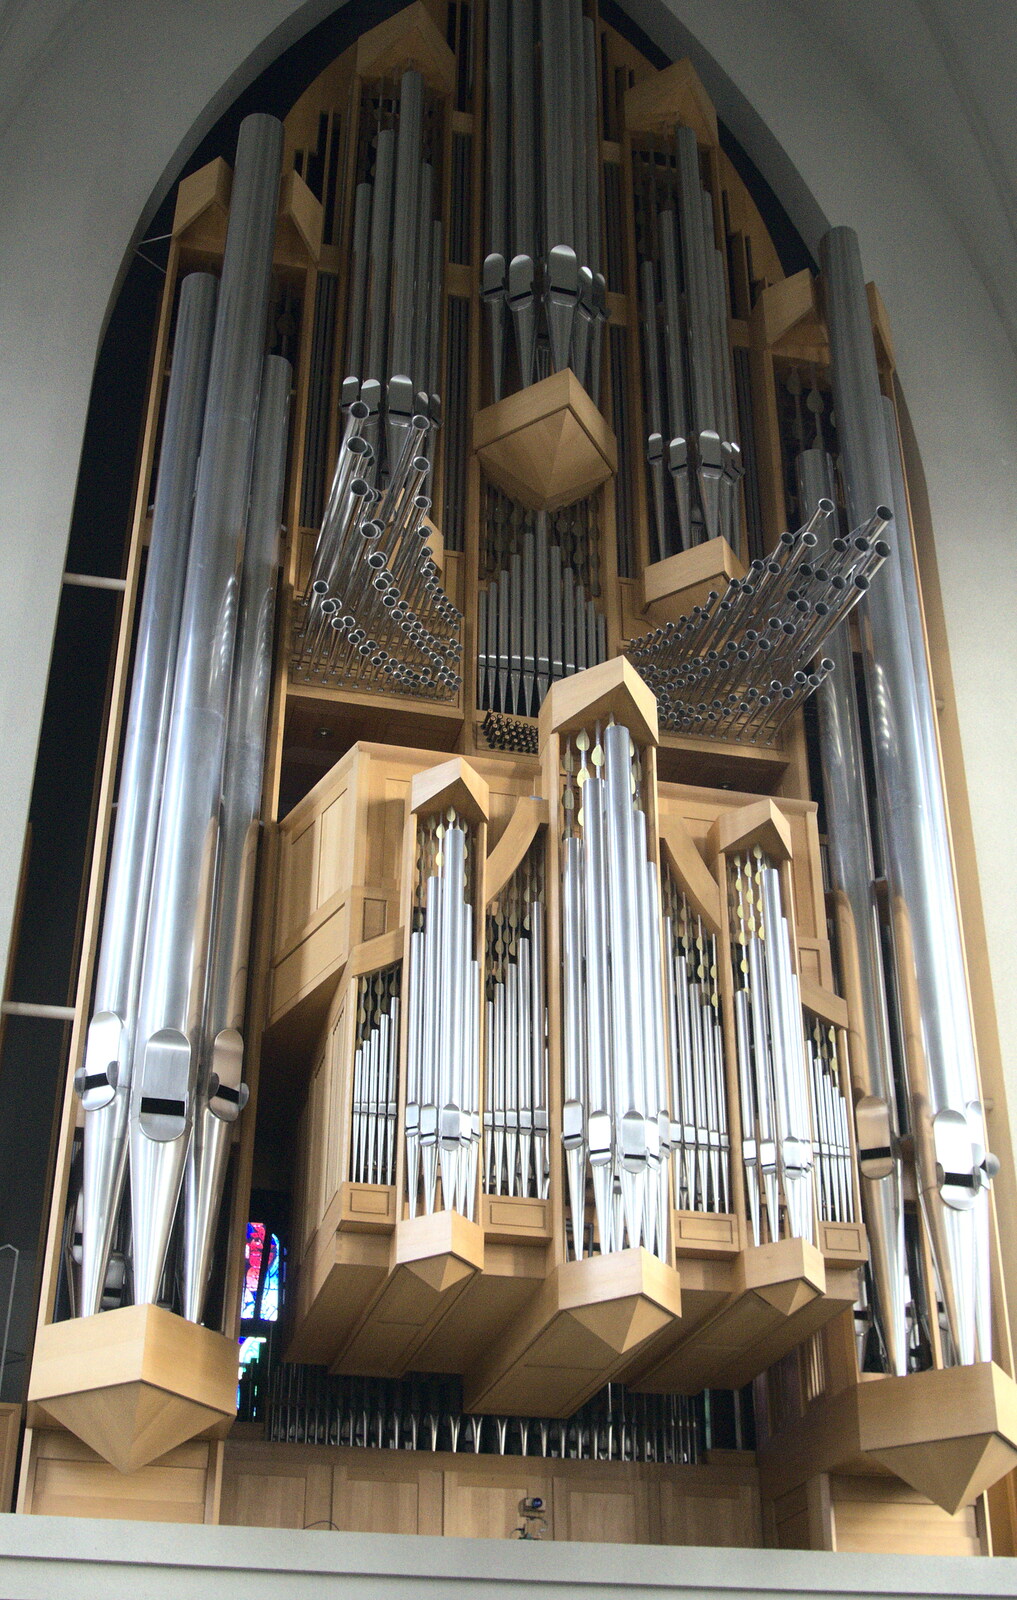 The amazing Klais organ, with V-8 exhausts from Hallgrímskirkja Cathedral and Whale Watching, Reykjavik - 21st April 2017